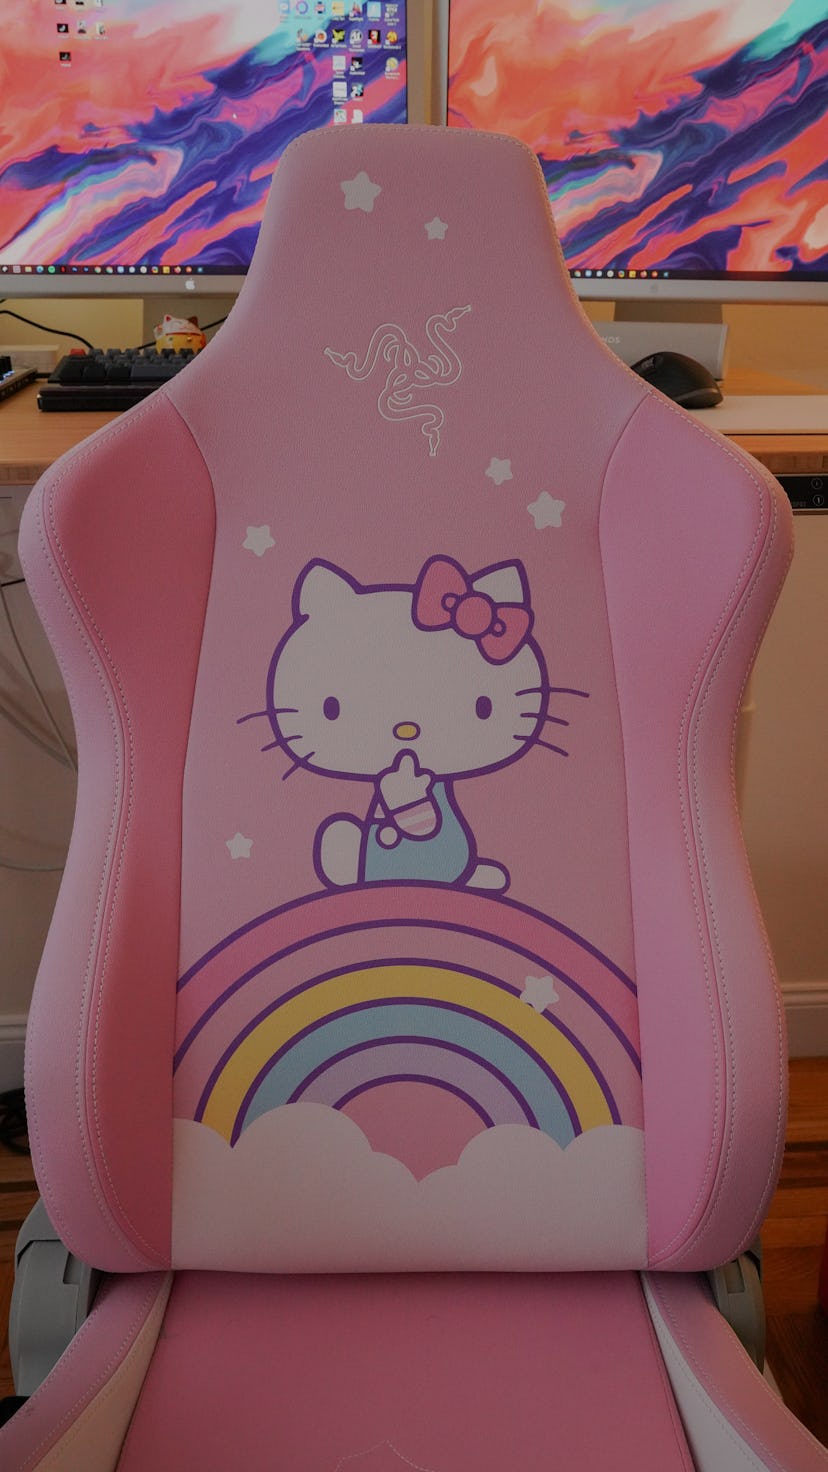 Razer Hello Kitty Iskur X gaming chair review